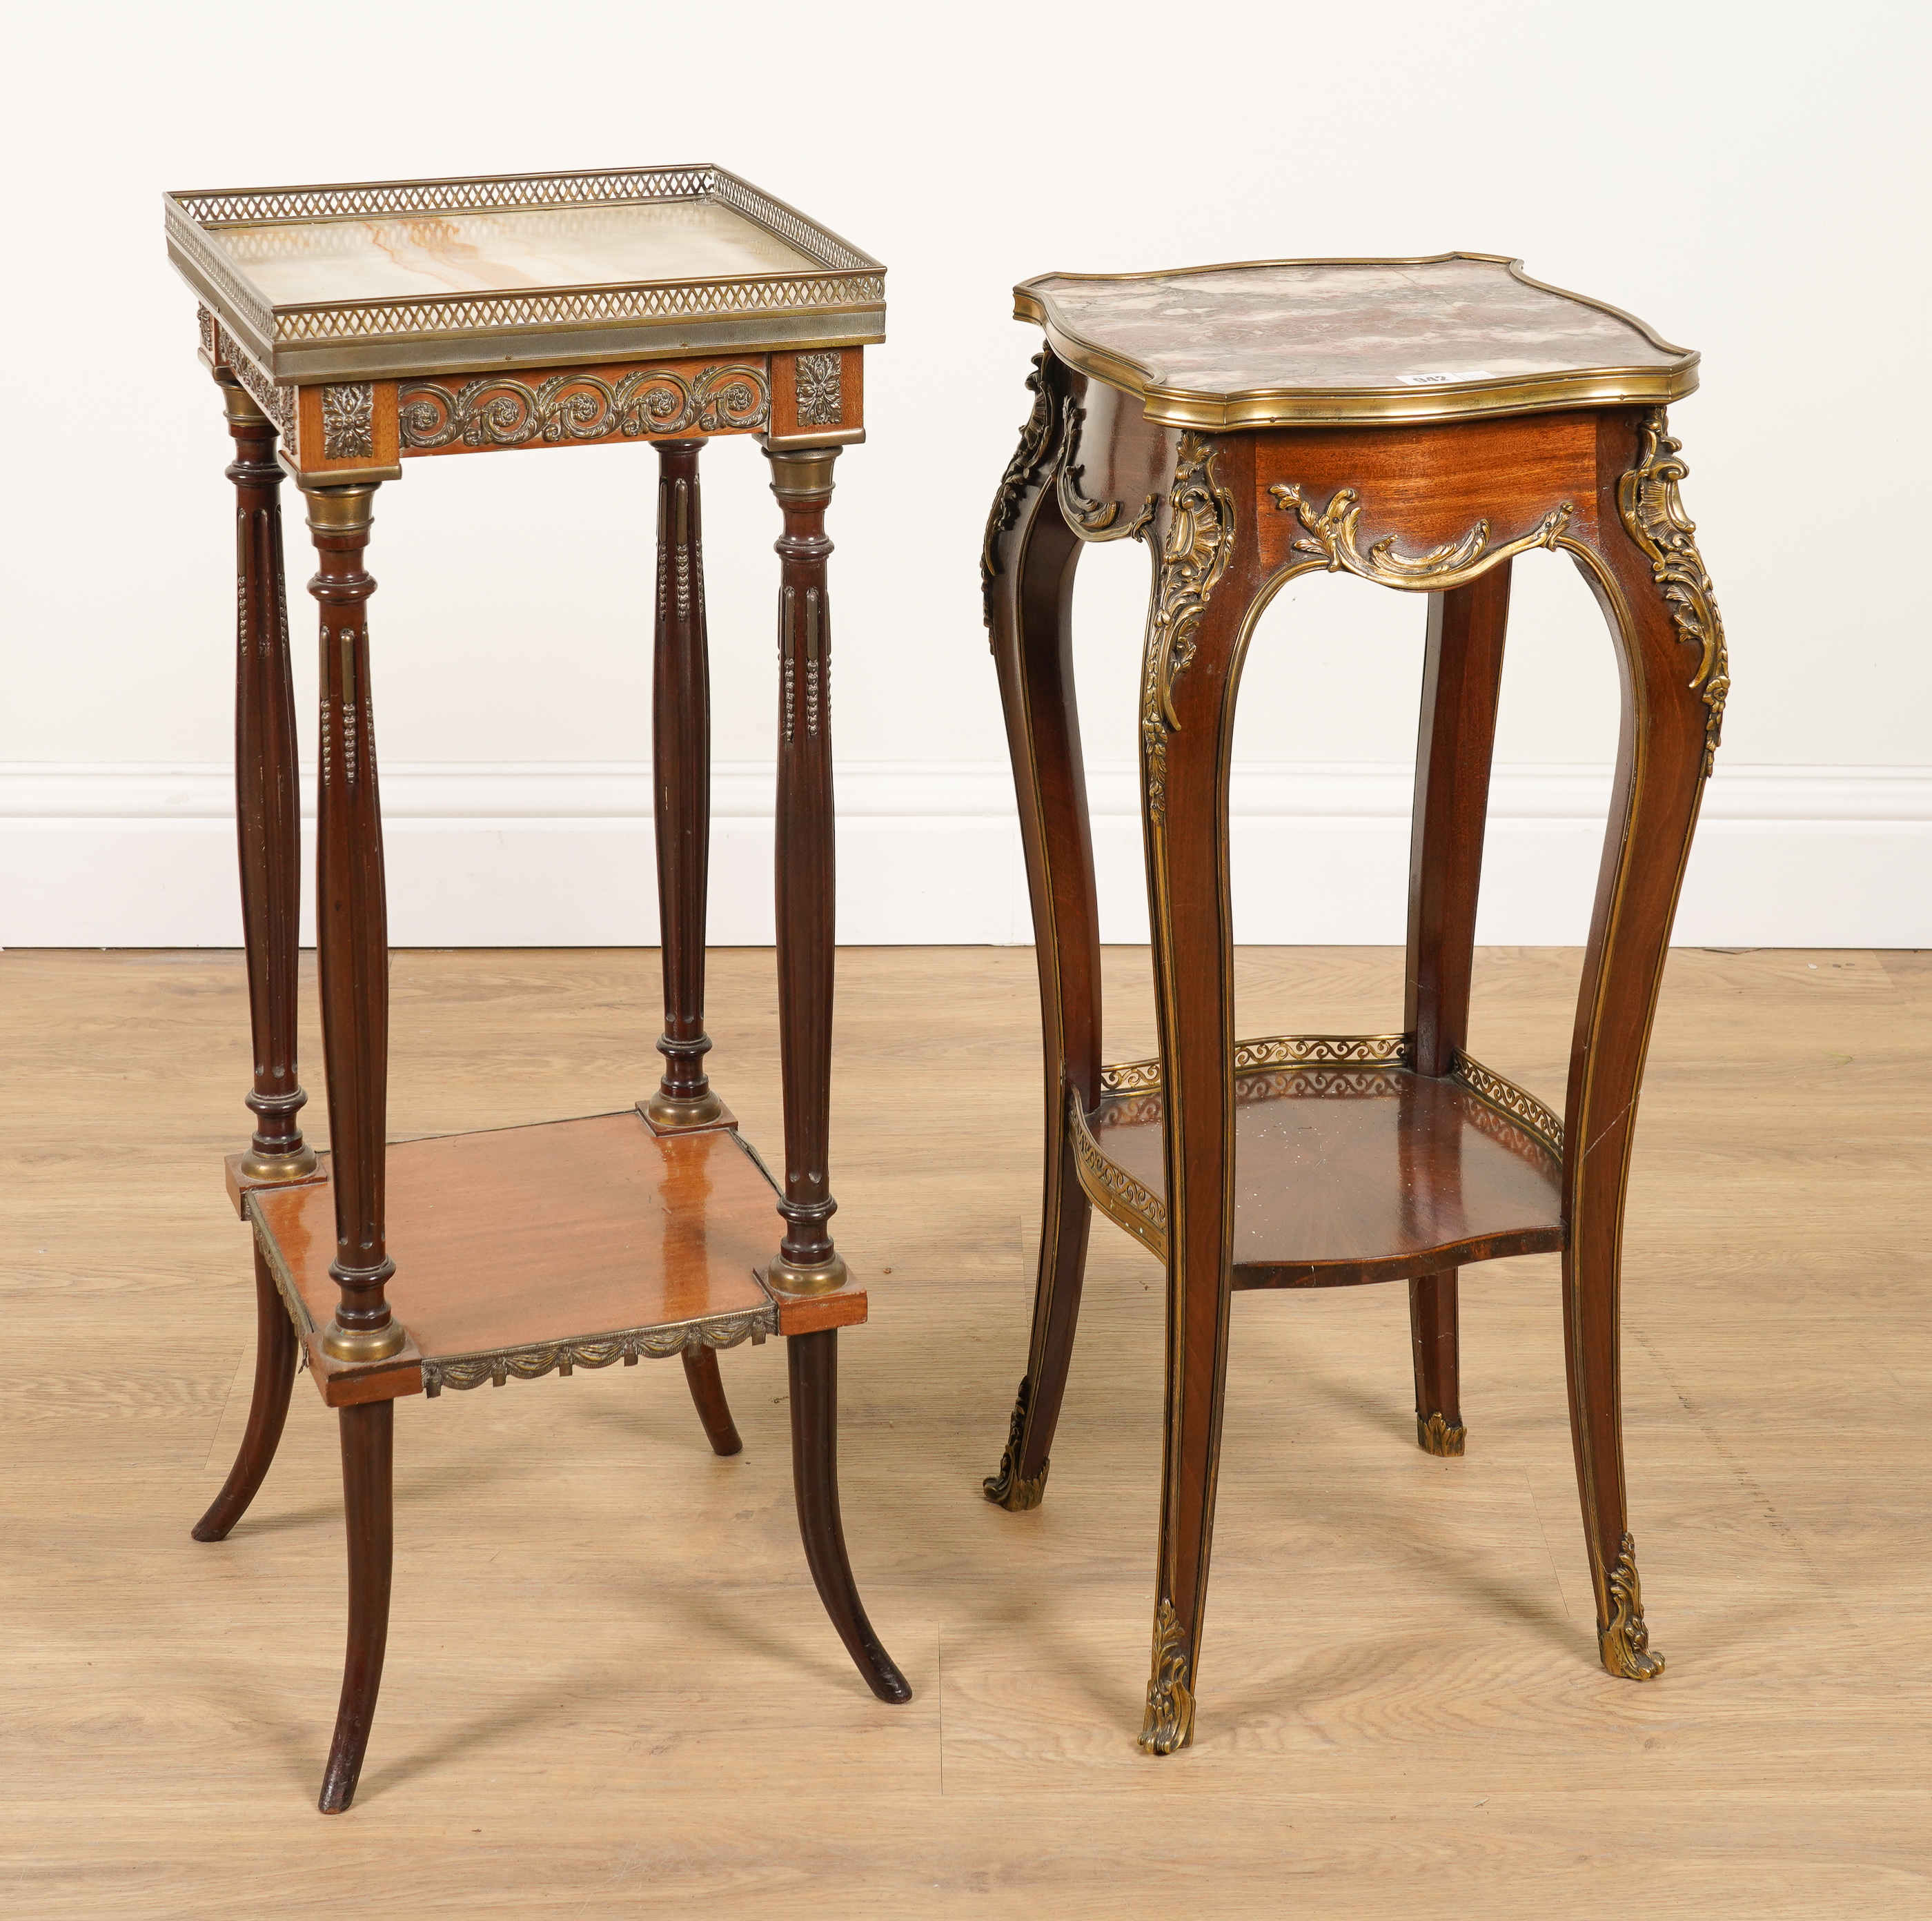 A LATE 19TH CENTURY FRENCH GILT-METAL MOUNTED MARBLE TOPPED TWO TIER OCCASIONAL TABLE (2)